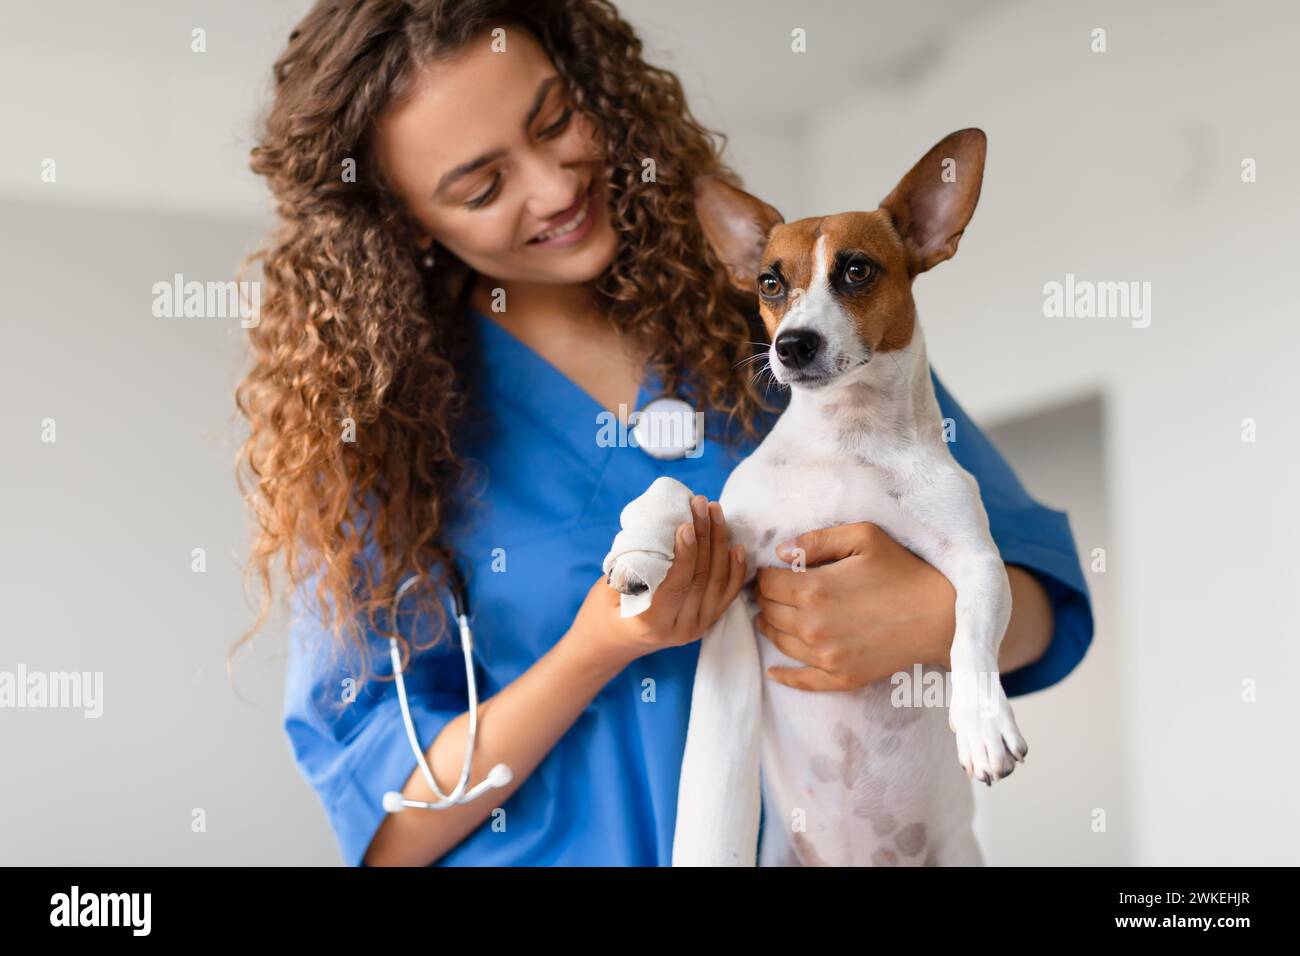 Vet wrapping Jack Russell's paw, both calm and attentive Stock Photo